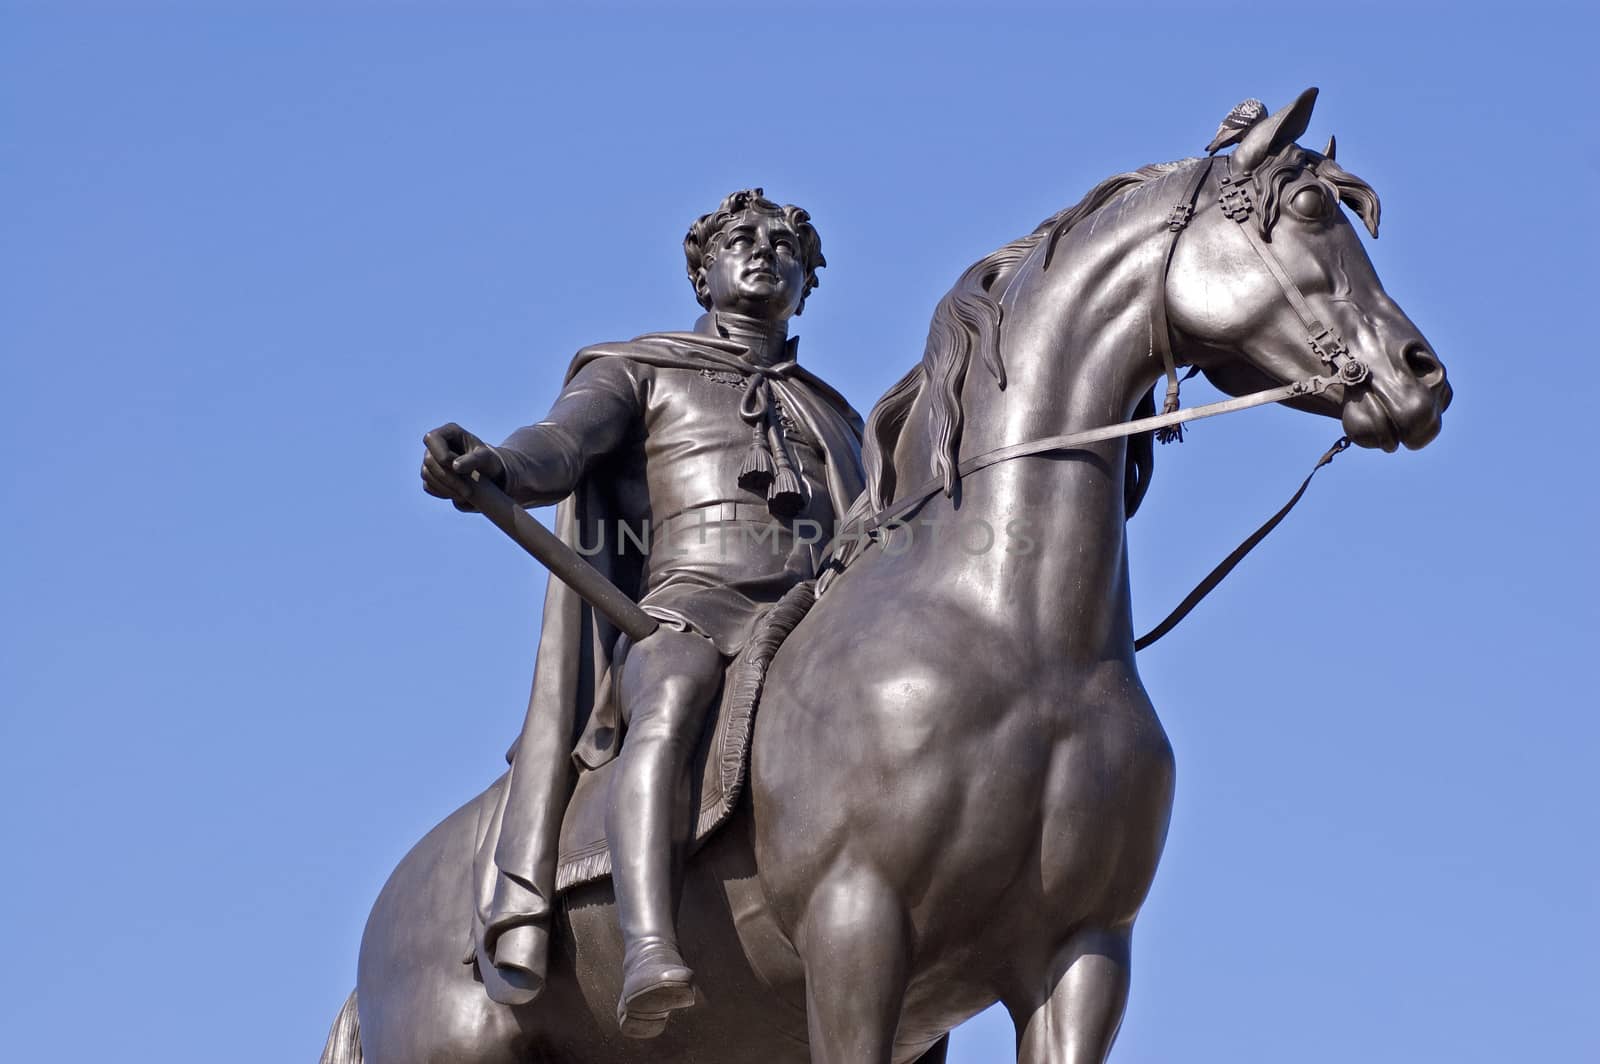 King George IV Statue by BasPhoto